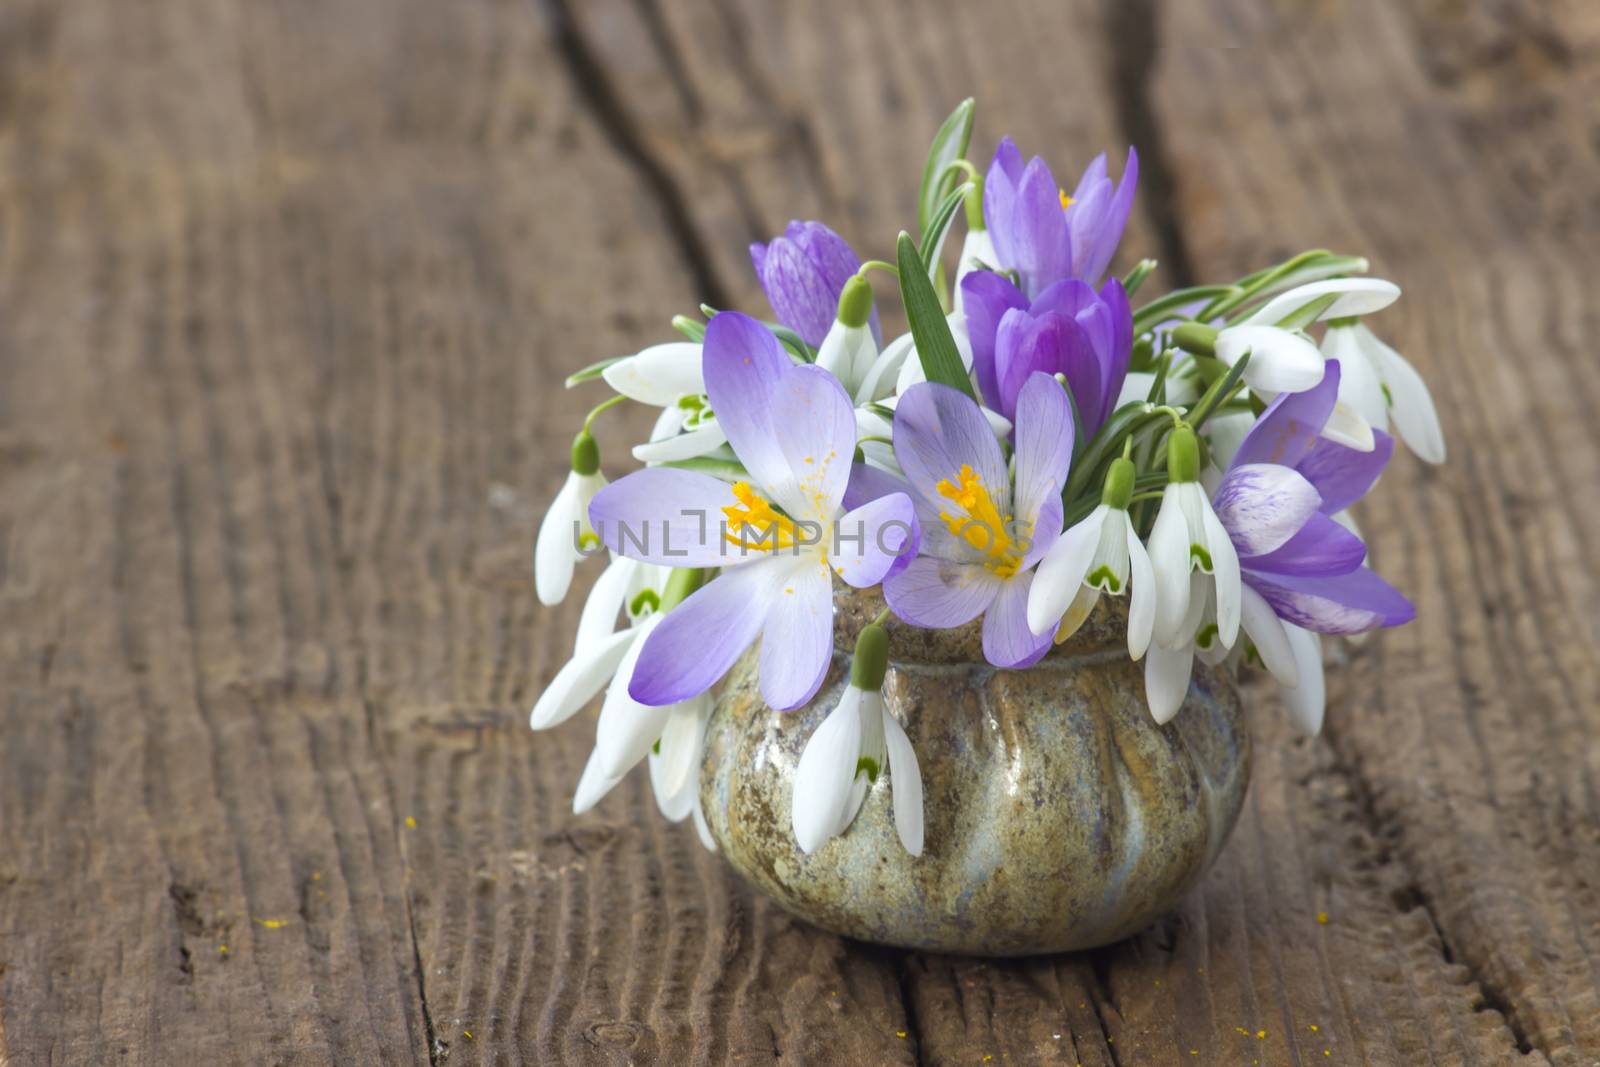 Bunch of crocus and snowdrops in a vase on the wooden table. by miradrozdowski